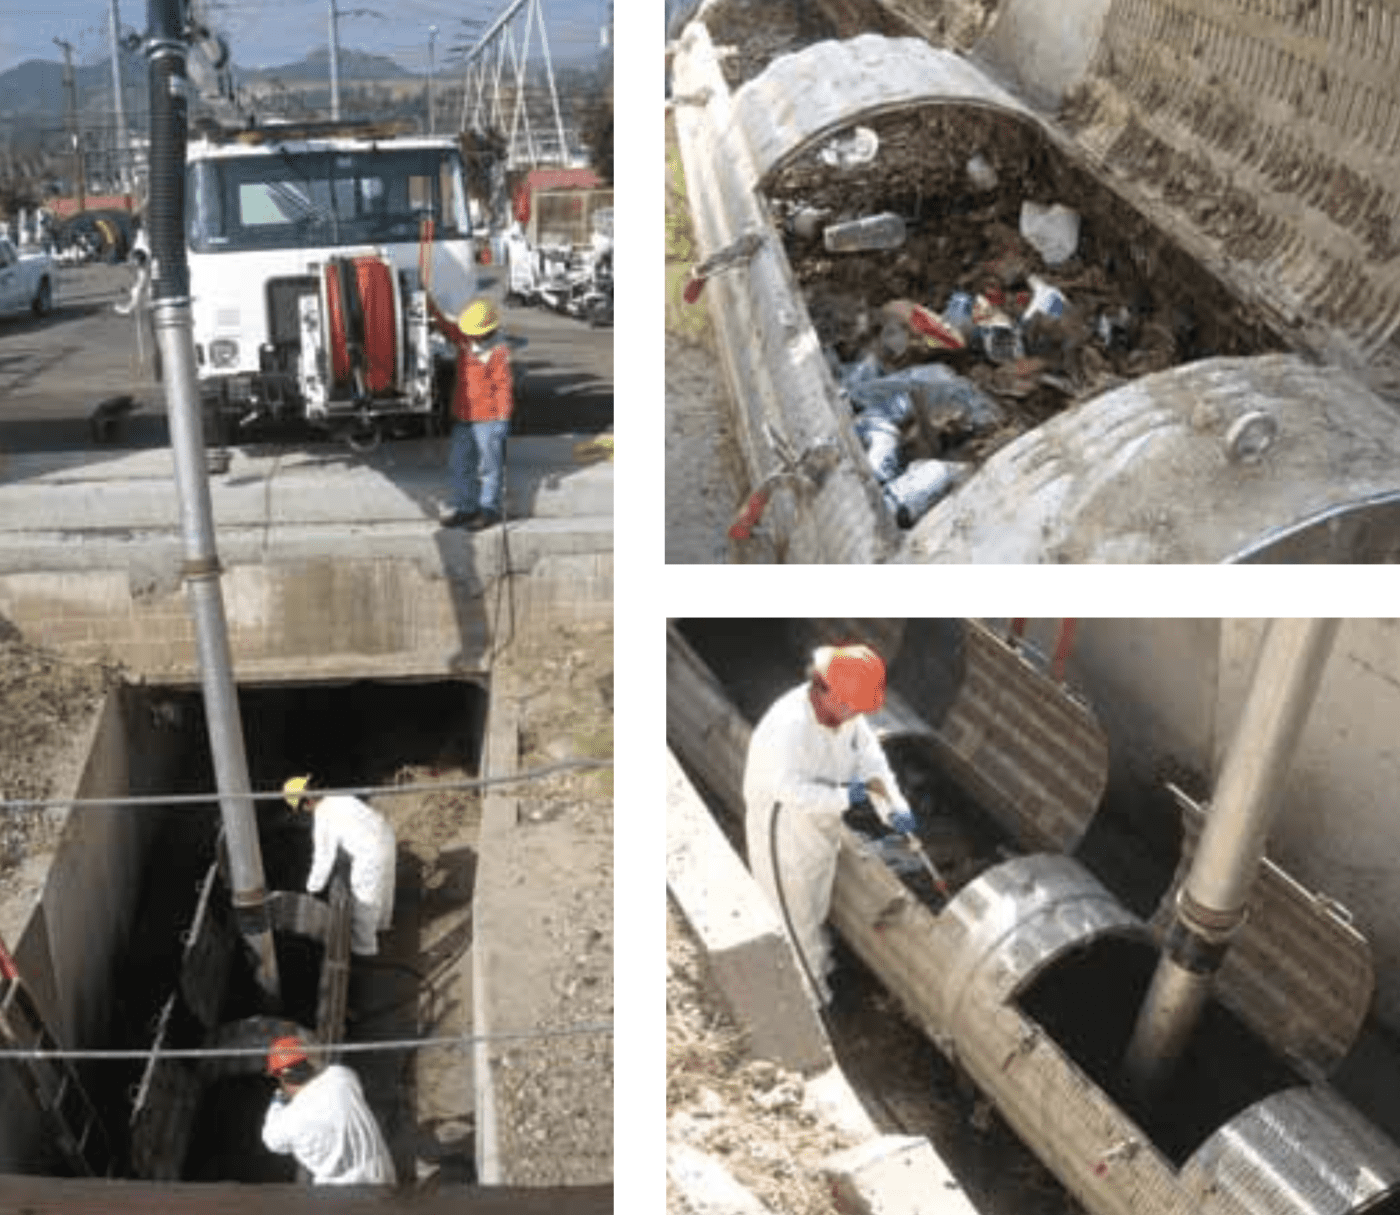 3 images of workers clearing trash from pipes with machinery